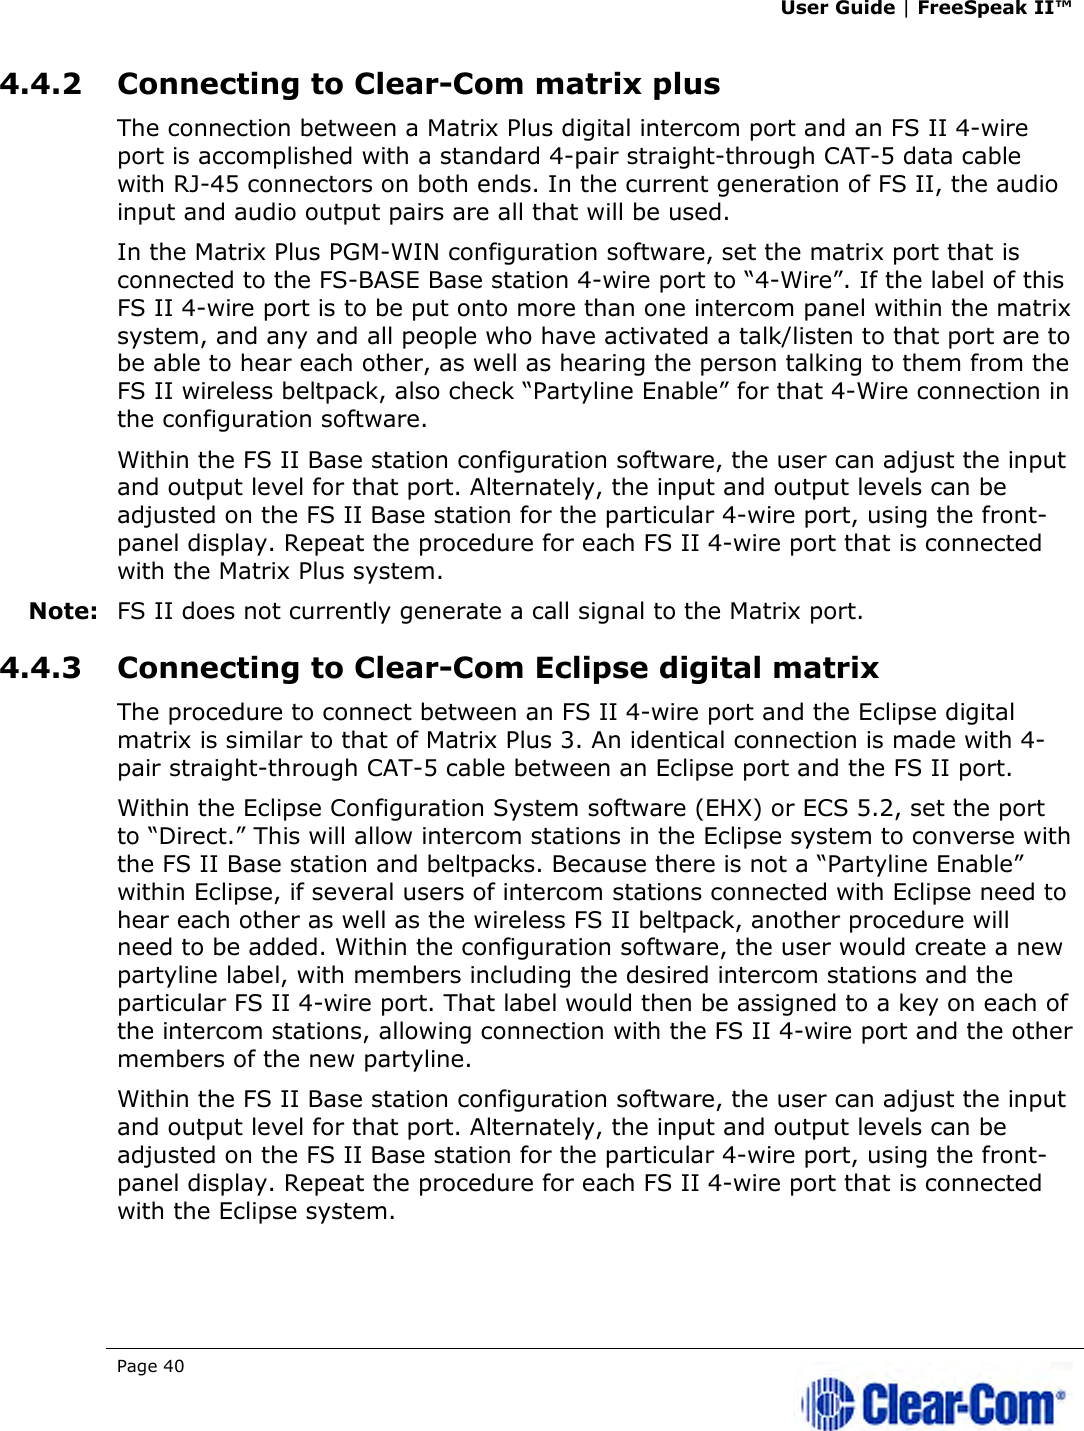 User Guide | FreeSpeak II™  Page 40   4.4.2 Connecting to Clear-Com matrix plus The connection between a Matrix Plus digital intercom port and an FS II 4-wire port is accomplished with a standard 4-pair straight-through CAT-5 data cable with RJ-45 connectors on both ends. In the current generation of FS II, the audio input and audio output pairs are all that will be used.  In the Matrix Plus PGM-WIN configuration software, set the matrix port that is connected to the FS-BASE Base station 4-wire port to “4-Wire”. If the label of this FS II 4-wire port is to be put onto more than one intercom panel within the matrix system, and any and all people who have activated a talk/listen to that port are to be able to hear each other, as well as hearing the person talking to them from the FS II wireless beltpack, also check “Partyline Enable” for that 4-Wire connection in the configuration software. Within the FS II Base station configuration software, the user can adjust the input and output level for that port. Alternately, the input and output levels can be adjusted on the FS II Base station for the particular 4-wire port, using the front-panel display. Repeat the procedure for each FS II 4-wire port that is connected with the Matrix Plus system. Note: FS II does not currently generate a call signal to the Matrix port.  4.4.3 Connecting to Clear-Com Eclipse digital matrix The procedure to connect between an FS II 4-wire port and the Eclipse digital matrix is similar to that of Matrix Plus 3. An identical connection is made with 4-pair straight-through CAT-5 cable between an Eclipse port and the FS II port. Within the Eclipse Configuration System software (EHX) or ECS 5.2, set the port to “Direct.” This will allow intercom stations in the Eclipse system to converse with the FS II Base station and beltpacks. Because there is not a “Partyline Enable” within Eclipse, if several users of intercom stations connected with Eclipse need to hear each other as well as the wireless FS II beltpack, another procedure will need to be added. Within the configuration software, the user would create a new partyline label, with members including the desired intercom stations and the particular FS II 4-wire port. That label would then be assigned to a key on each of the intercom stations, allowing connection with the FS II 4-wire port and the other members of the new partyline. Within the FS II Base station configuration software, the user can adjust the input and output level for that port. Alternately, the input and output levels can be adjusted on the FS II Base station for the particular 4-wire port, using the front-panel display. Repeat the procedure for each FS II 4-wire port that is connected with the Eclipse system. 